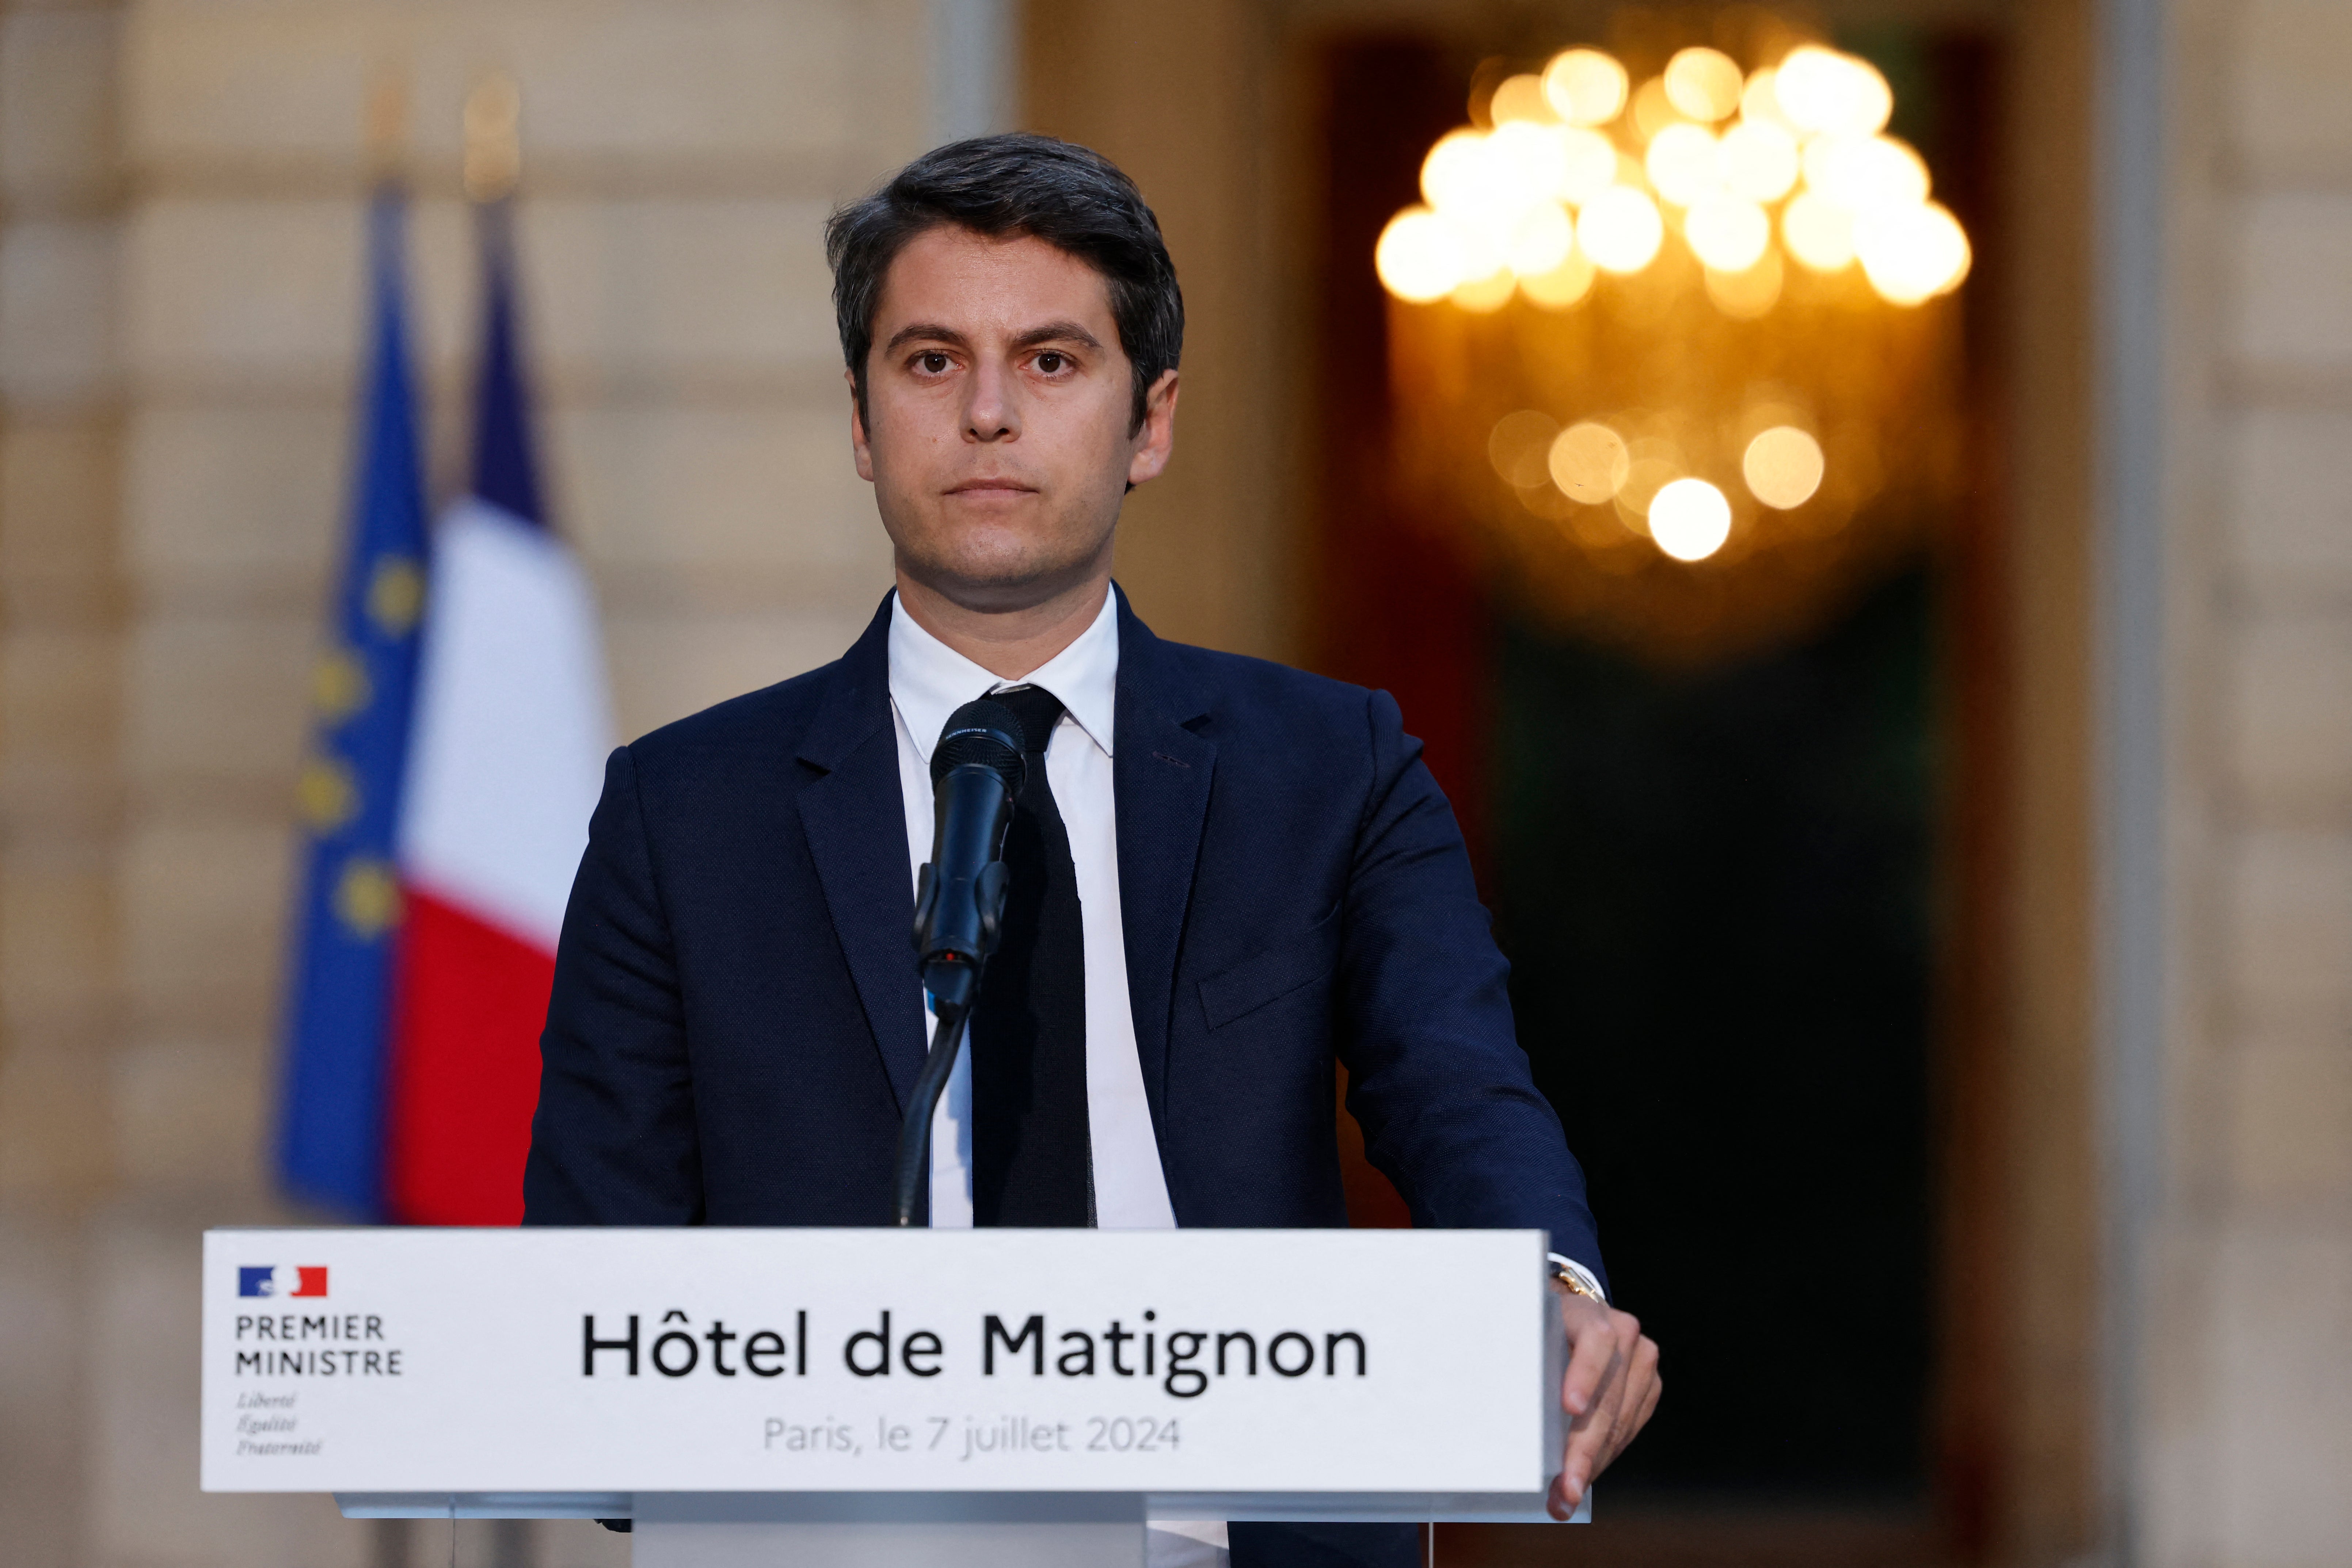 France’s prime minister Gabriel Attal gives a speech following the first results of the second round of France’s legislative election at Matignon in Paris on 7 July 202